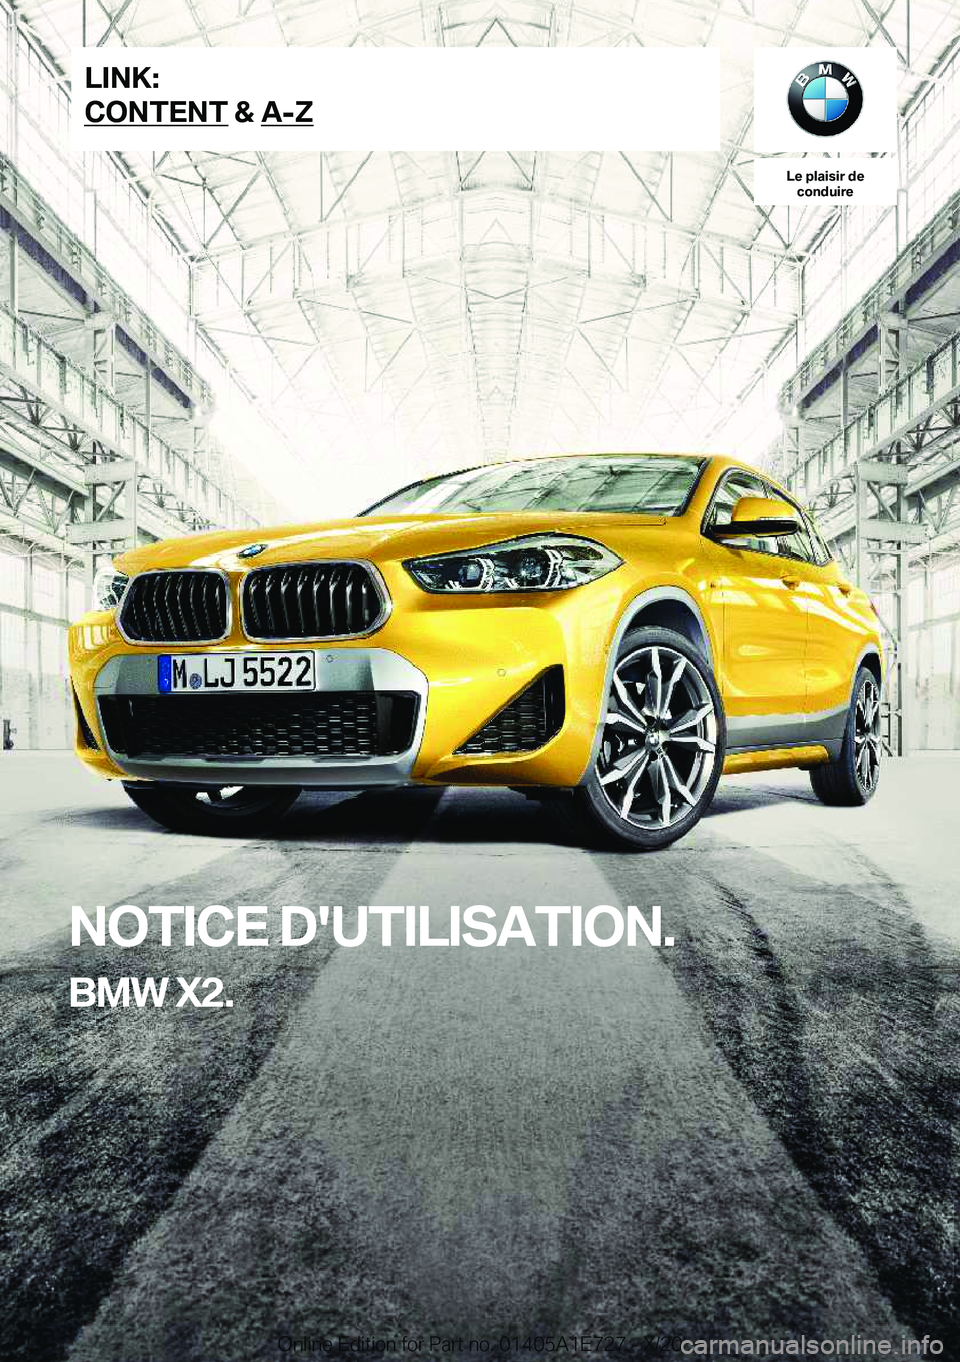 BMW X2 2021  Notices Demploi (in French) �L�e��p�l�a�i�s�i�r��d�e�c�o�n�d�u�i�r�e
�N�O�T�I�C�E��D�'�U�T�I�L�I�S�A�T�I�O�N�.
�B�M�W��X�2�.�L�I�N�K�:
�C�O�N�T�E�N�T��&��A�-�Z�O�n�l�i�n�e��E�d�i�t�i�o�n��f�o�r��P�a�r�t��n�o�.��0�